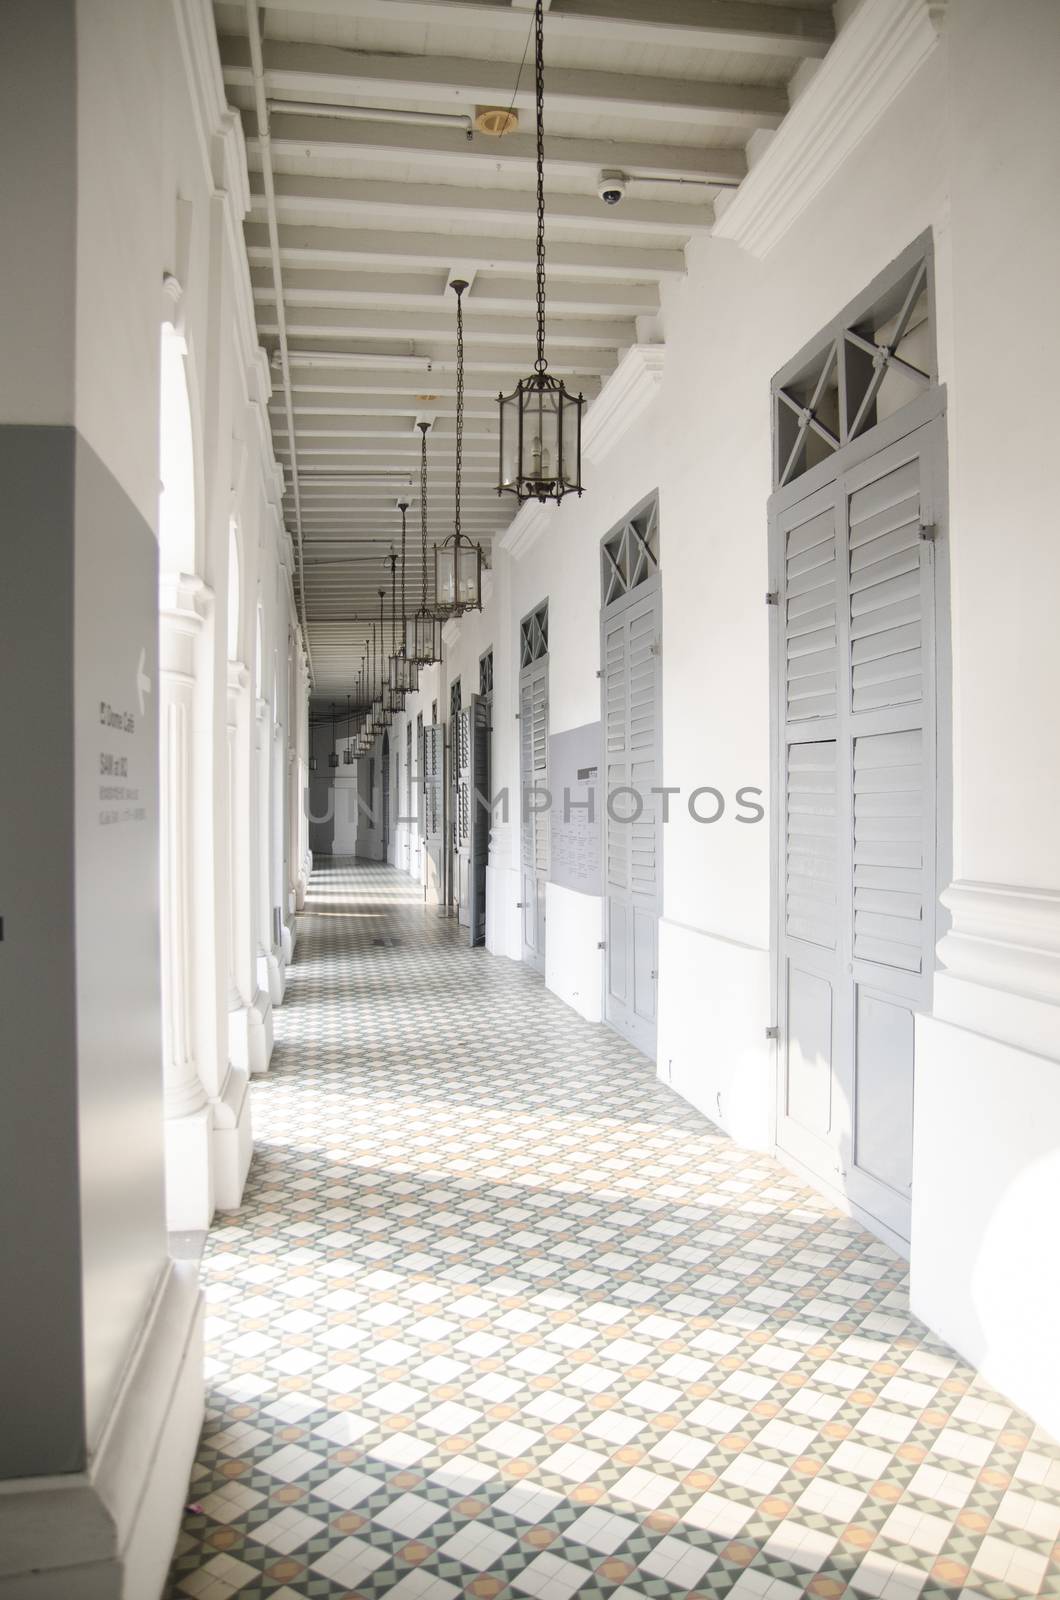 Covered corridor in Singapore build by Vanzyst